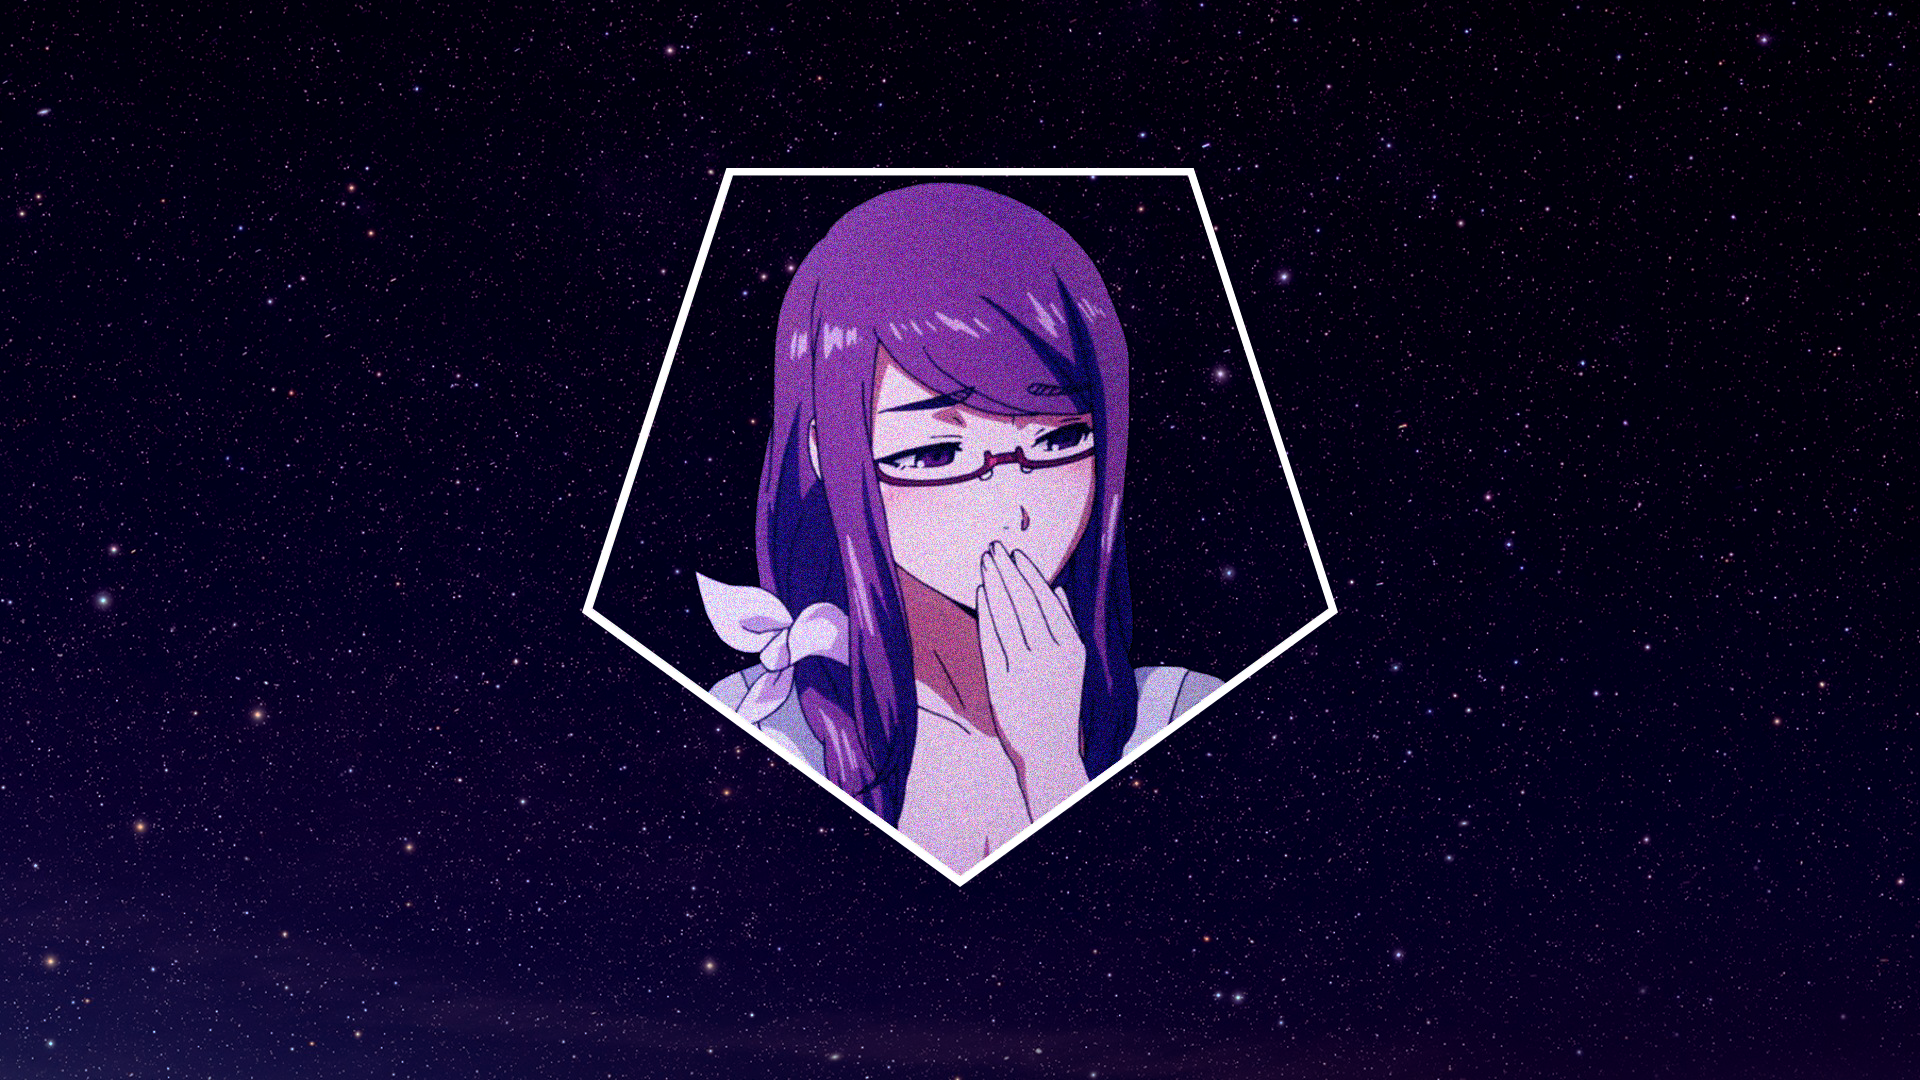 Kamishiro Rize Night Sky Tokyo Ghoul Picture In Picture 1920x1080